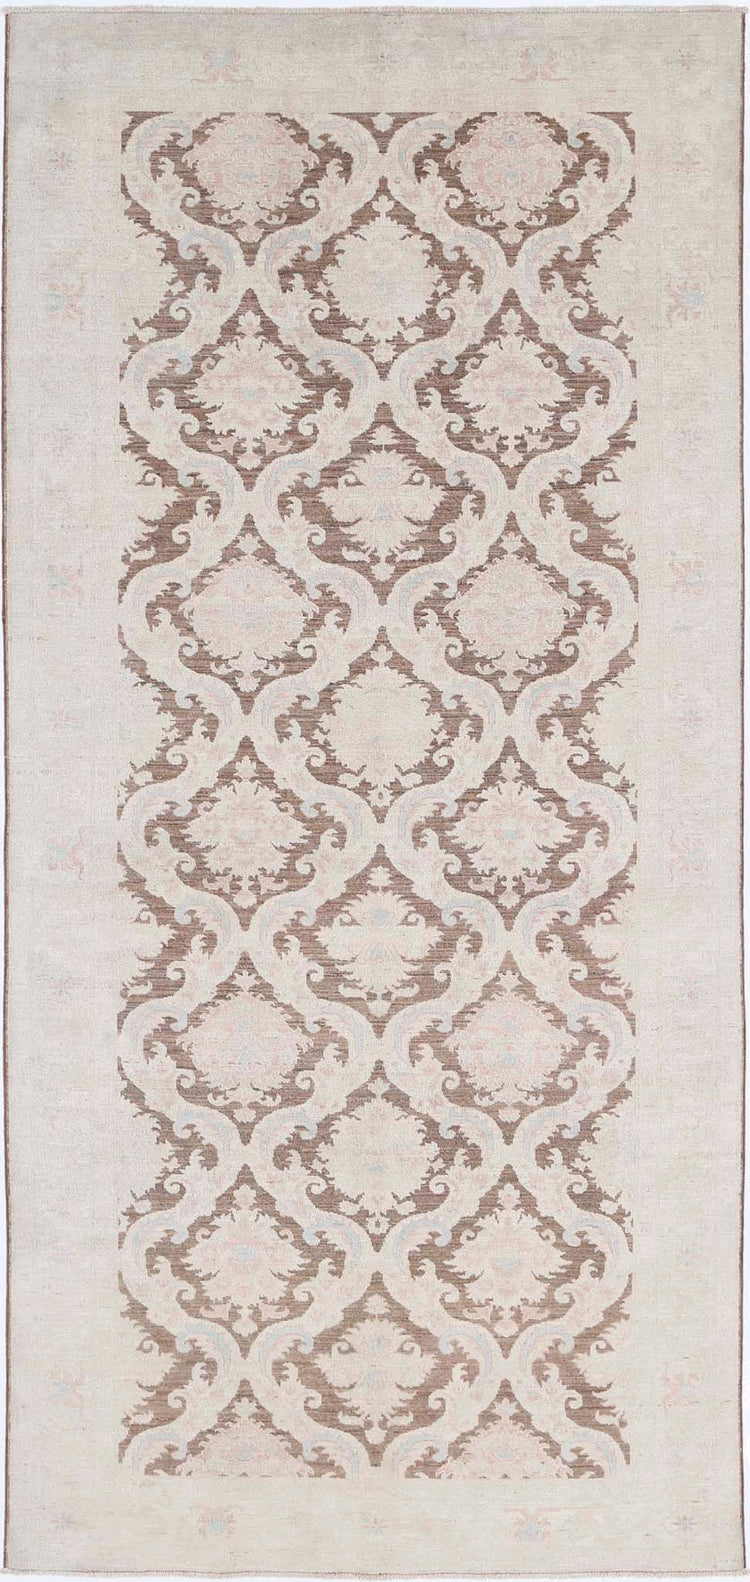 Traditional Hand Knotted Serenity Tabriz Wool Rug of Size 4'9'' X 10'9'' in Brown and Ivory Colors - Made in Afghanistan